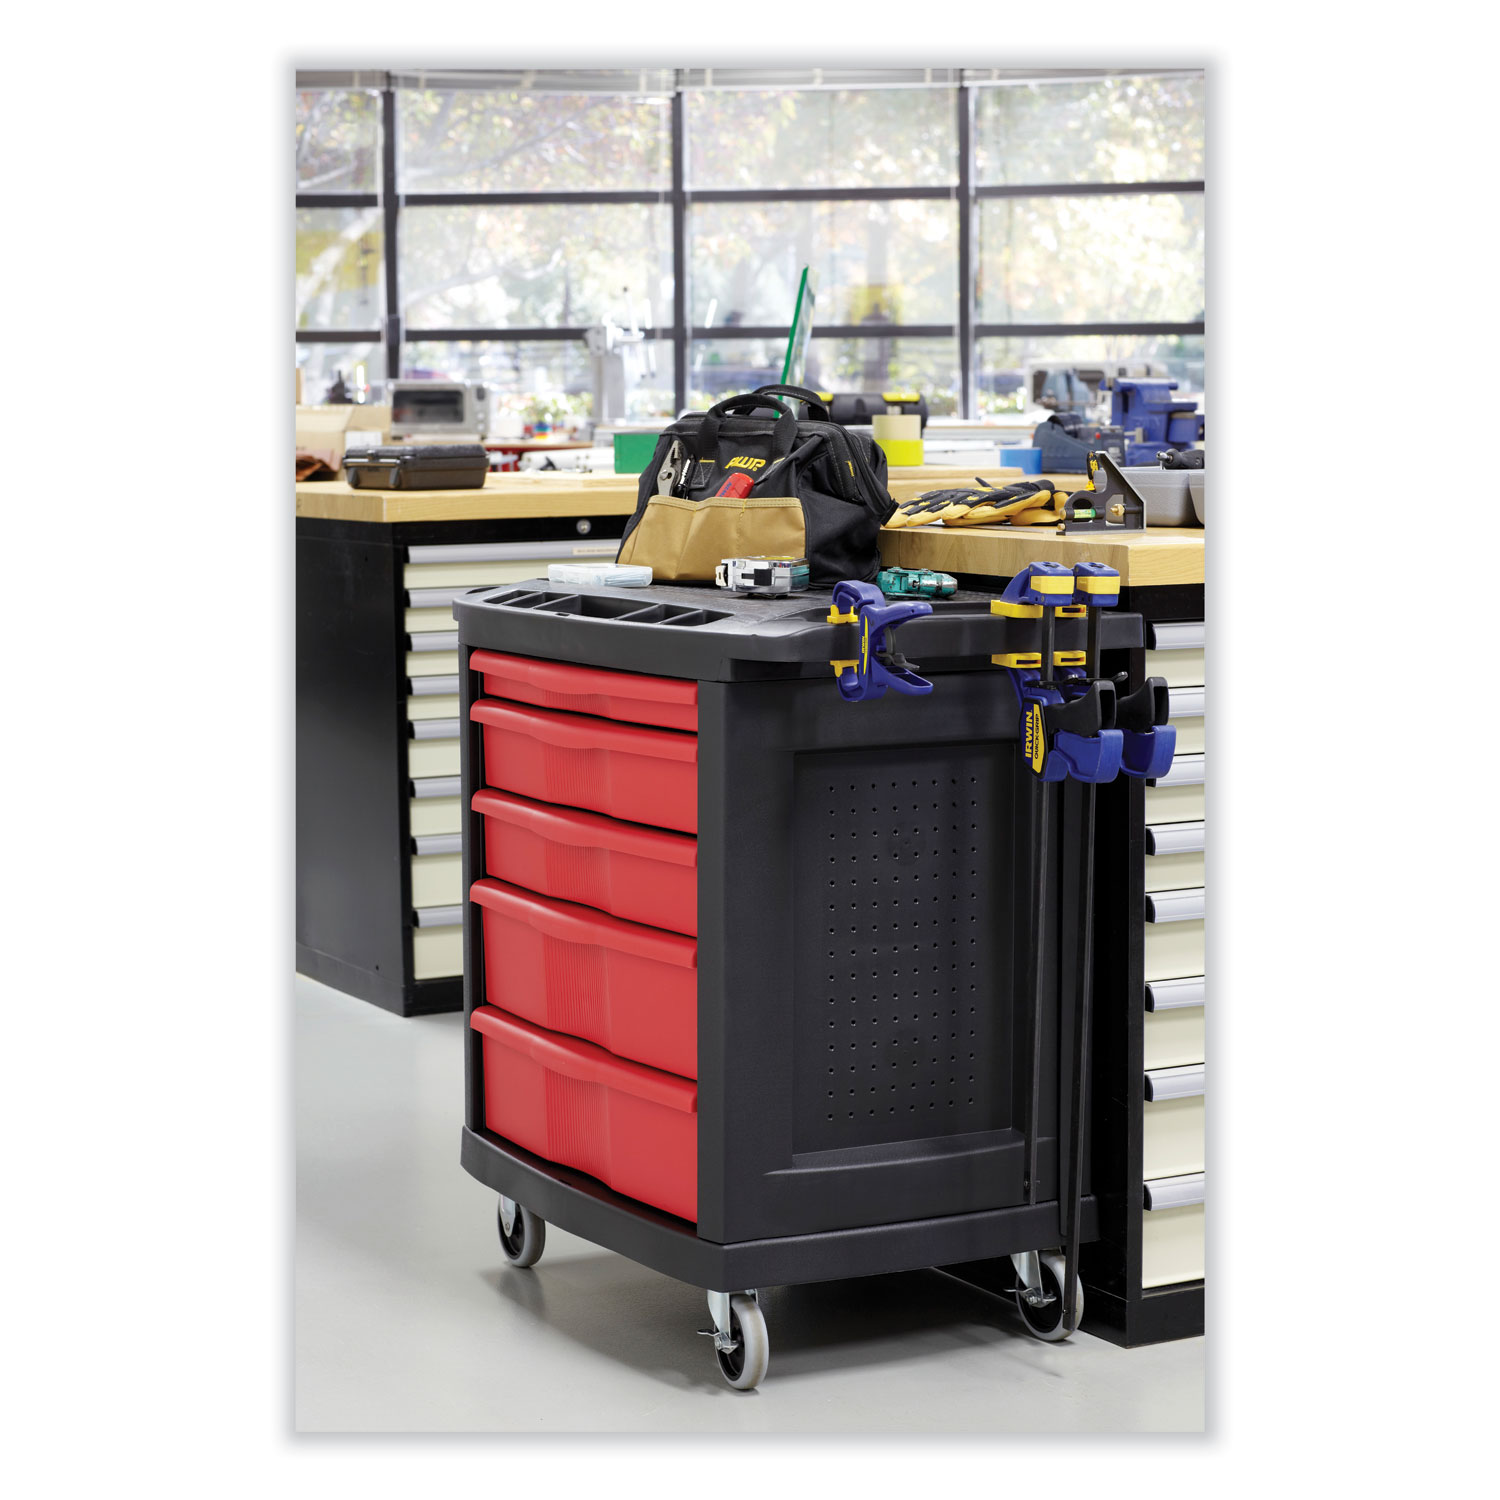 RubberMaid 5-Drawer Work Center Tool Chest